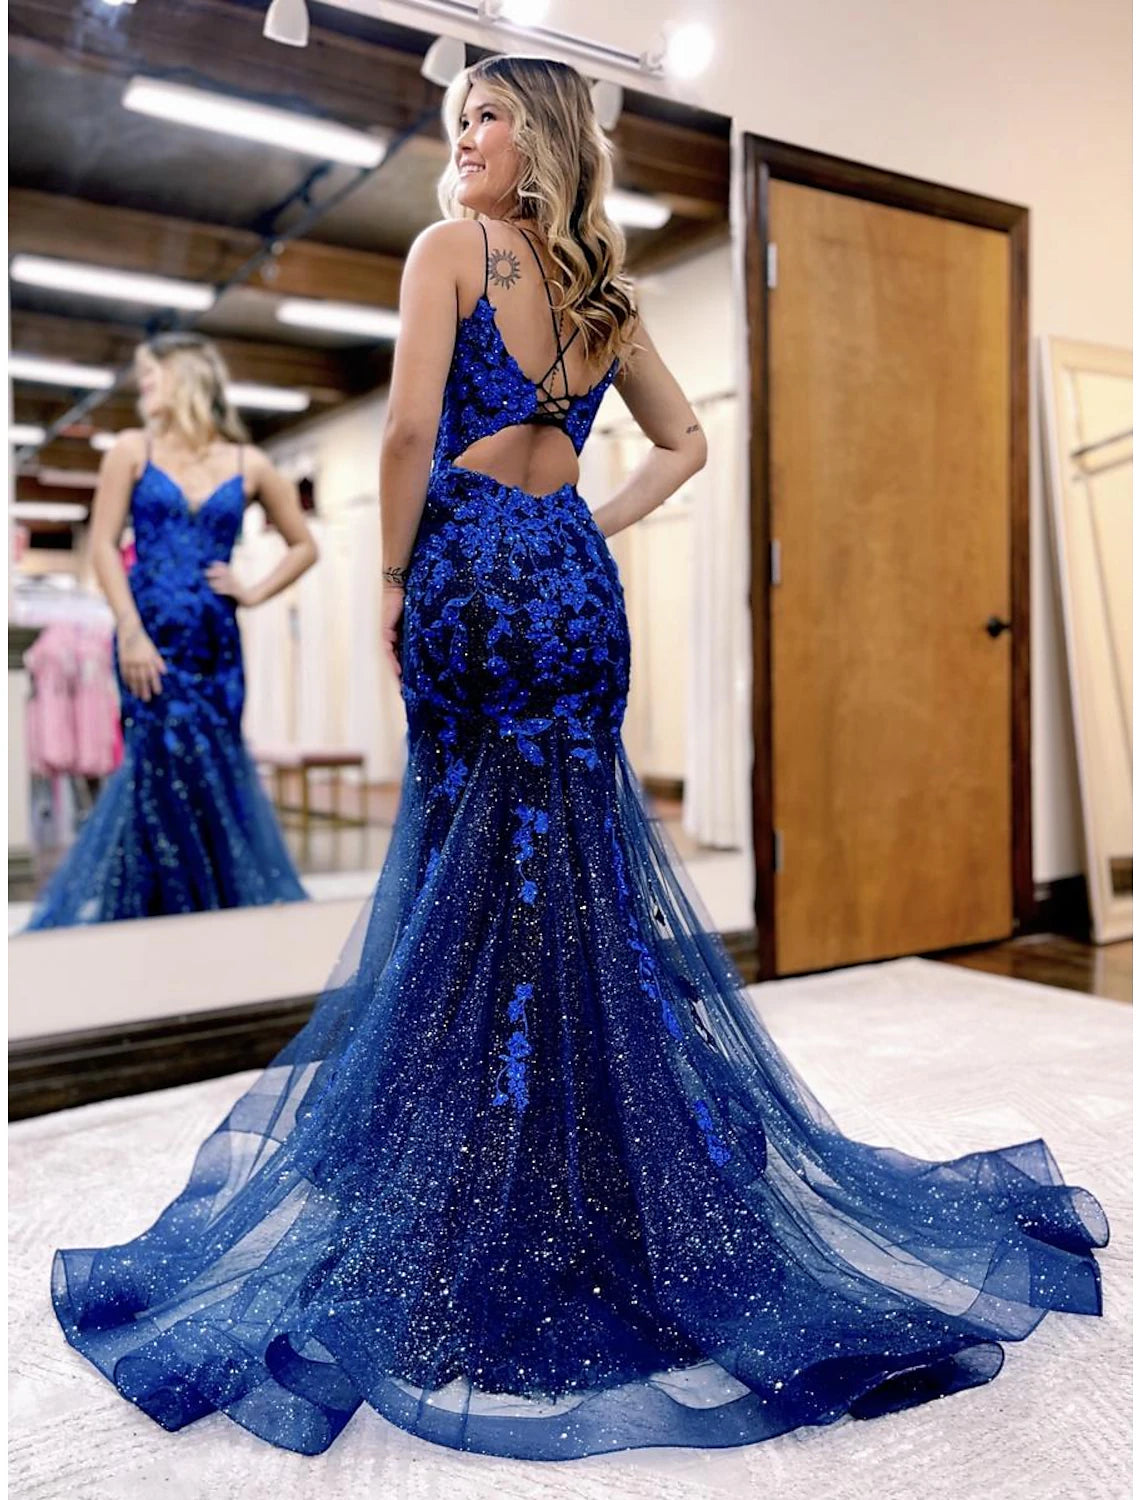 Mermaid / Trumpet Prom Dresses Sparkle & Shine Dress Formal Court Train Sleeveless V Neck Tulle Backless with Glitter Beading Appliques